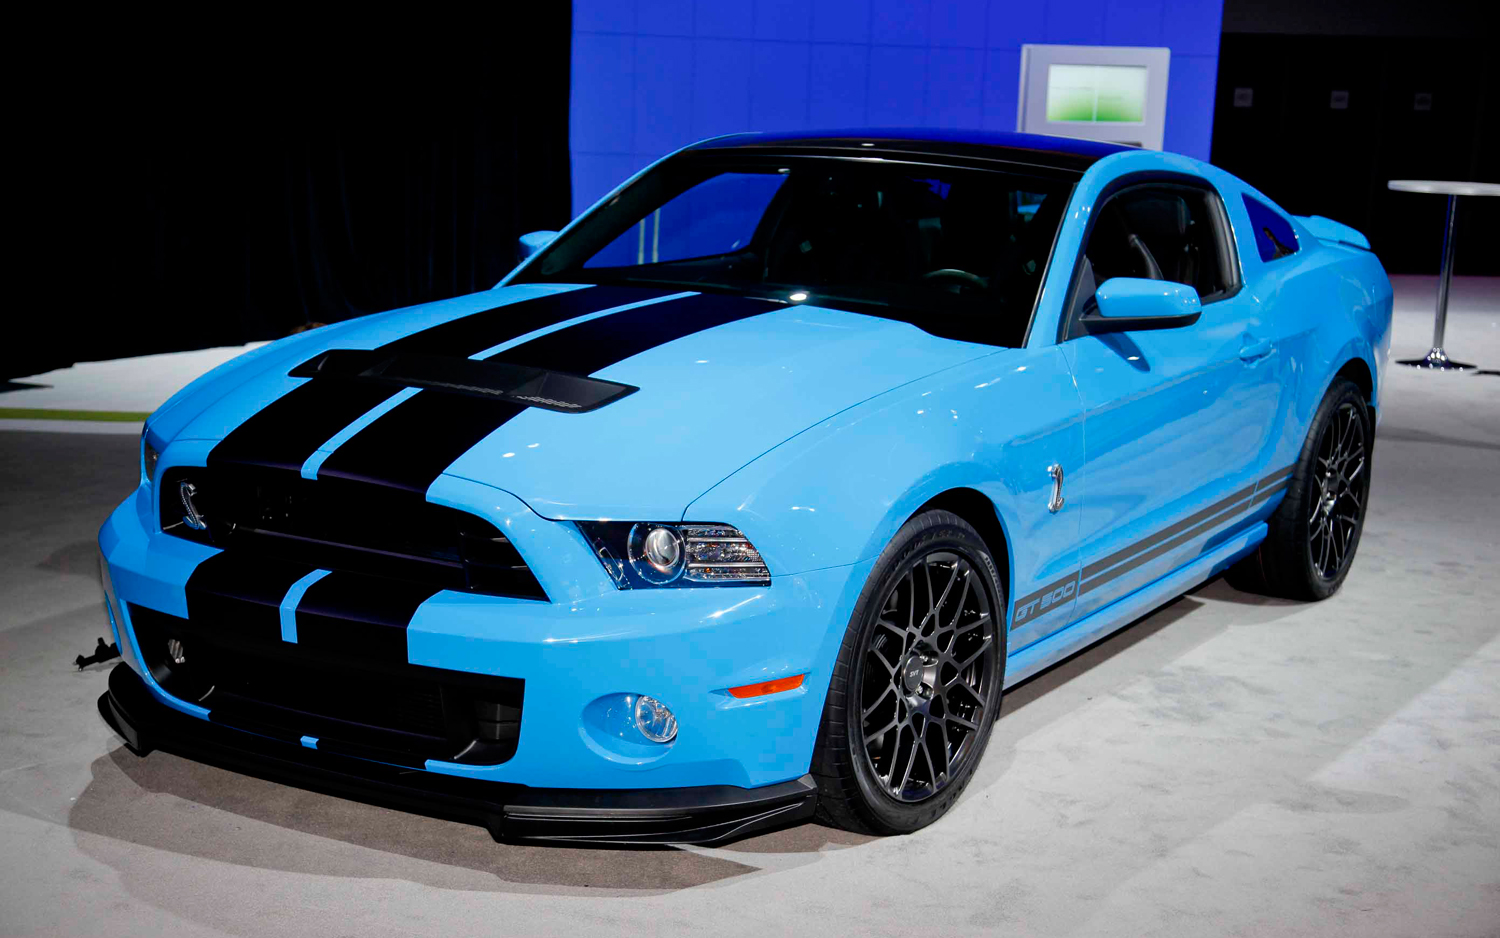 Ford Mustang Gt500 Shelby Wallpaper Pictures